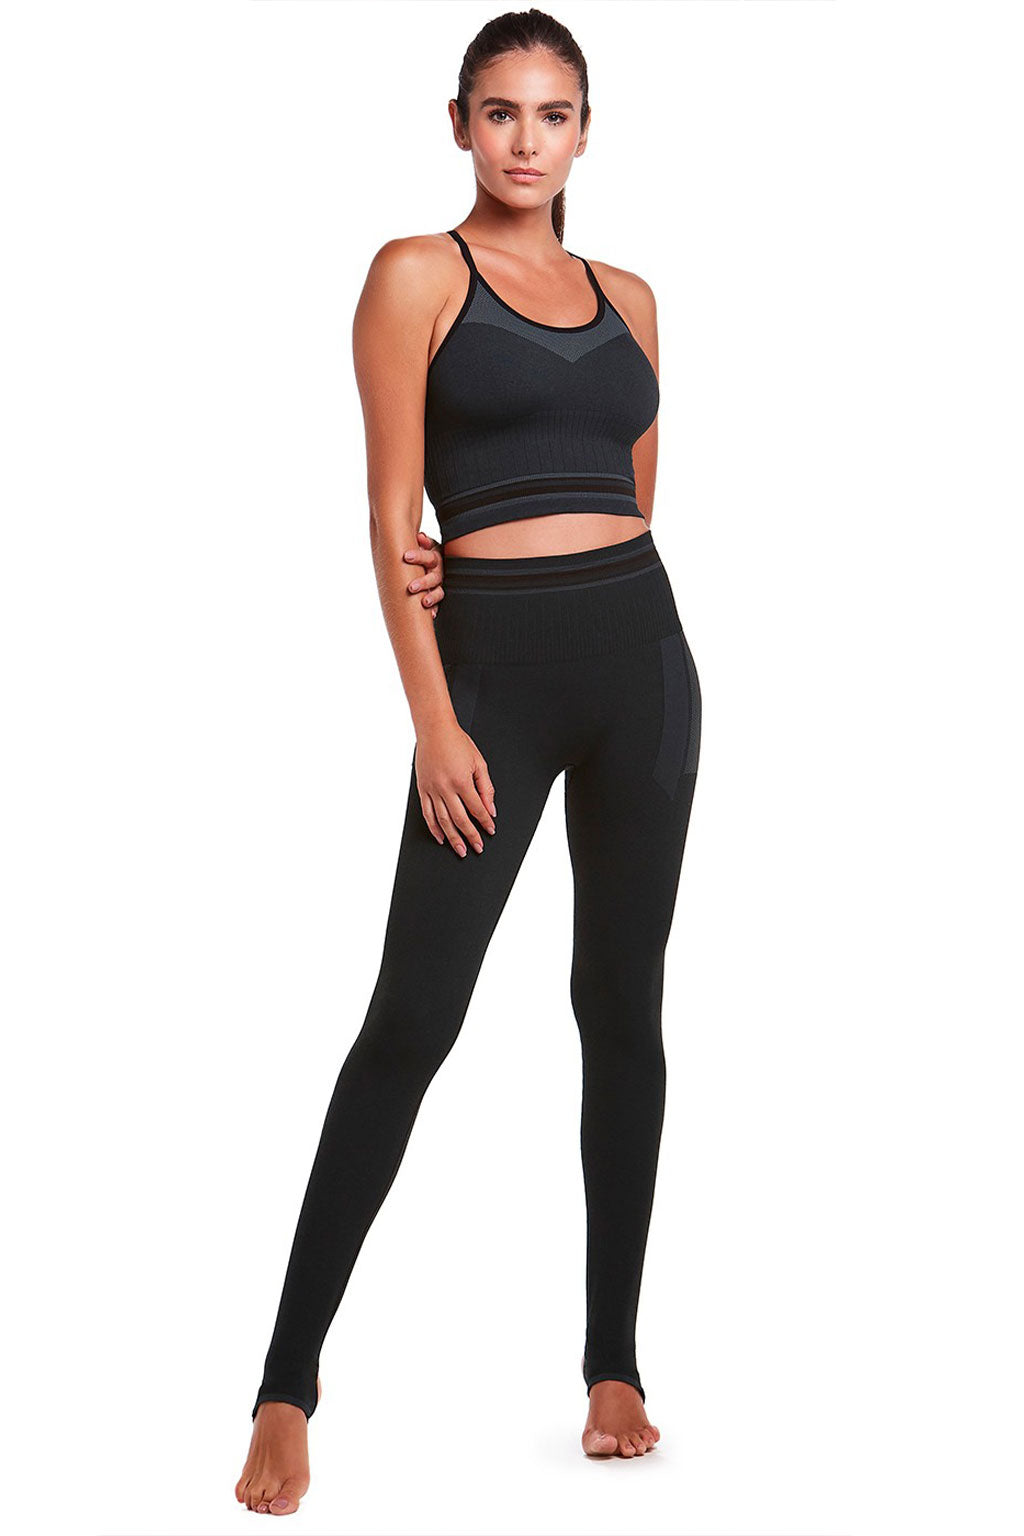 BASIC Top Cropped Fusion style Sport Bra